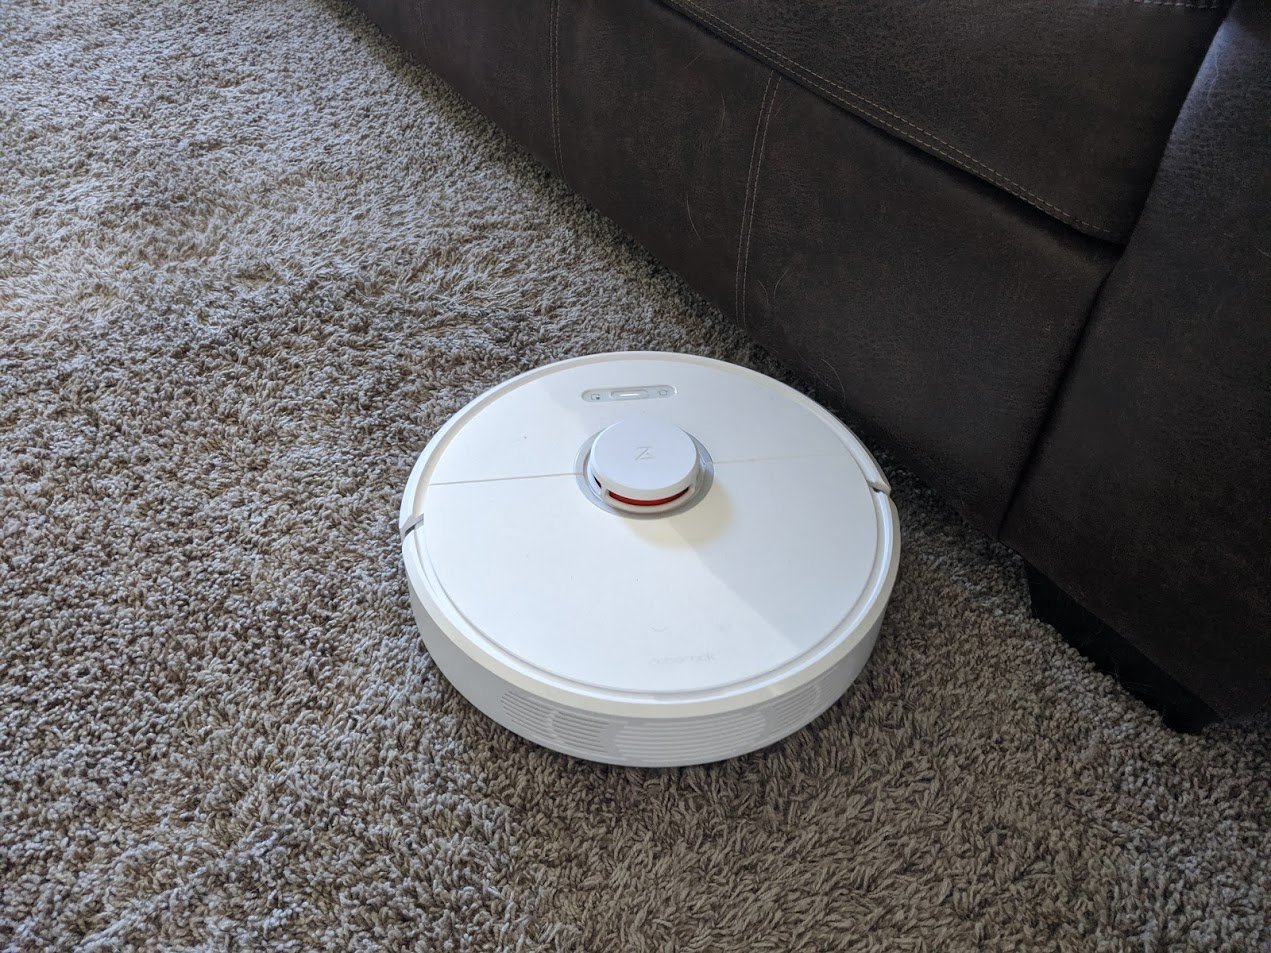 Roborock's S6 MaxV robot vacuum is too smart to do the dirty work